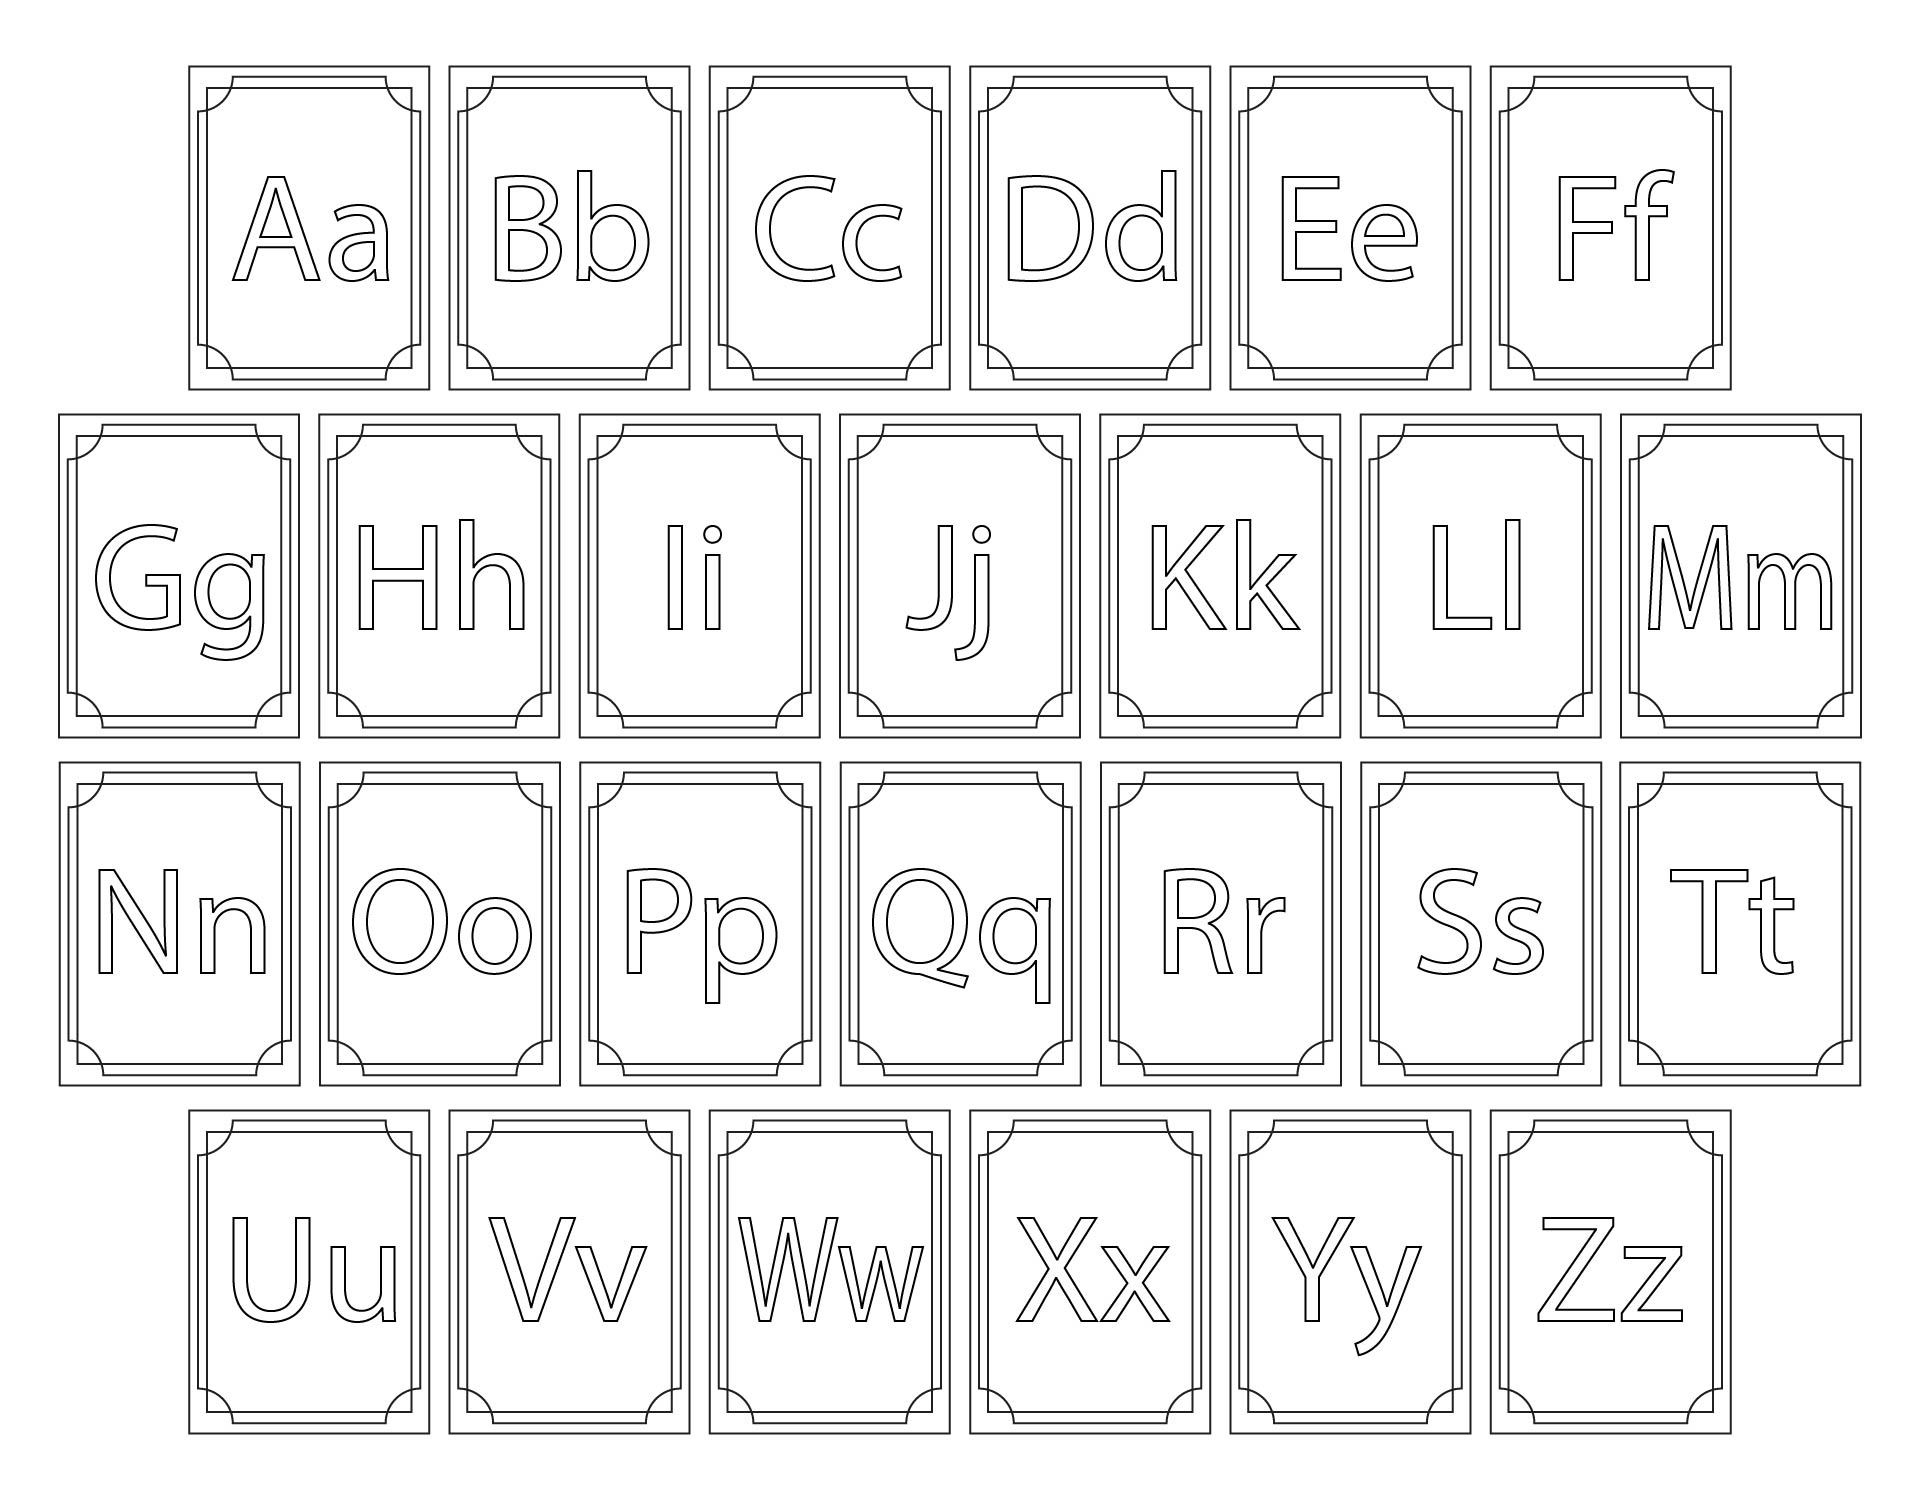 Large Printable Letters For Preschool